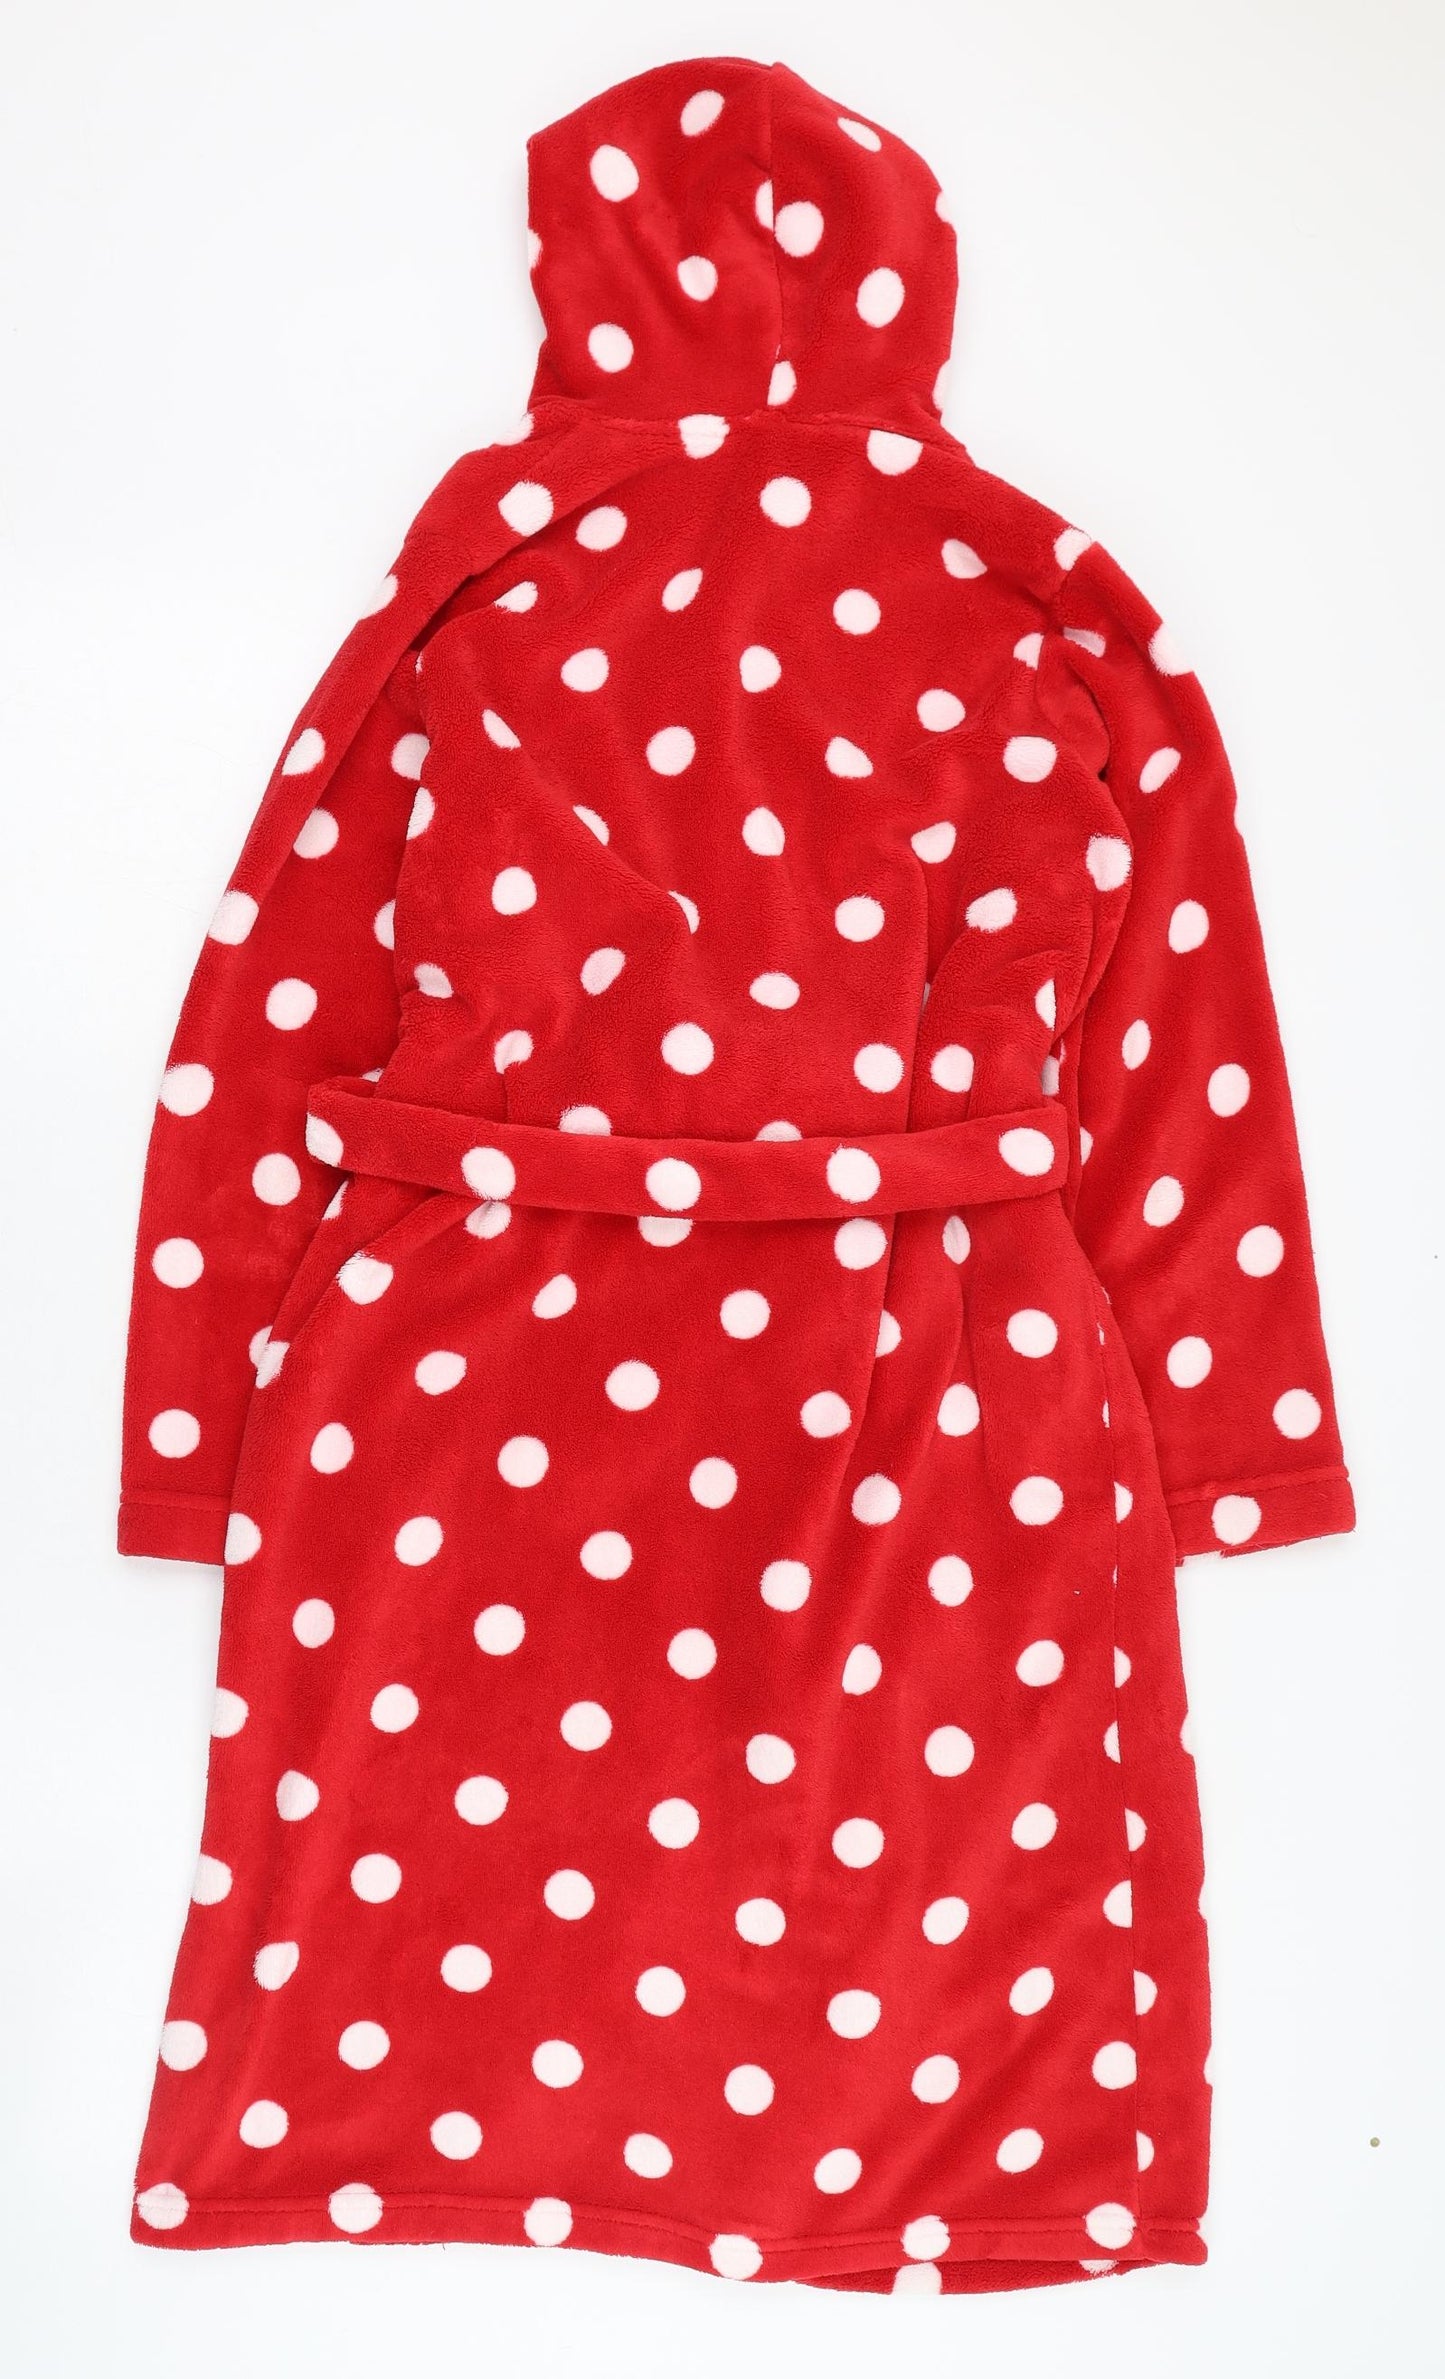 Marks and Spencer Girls Red Polka Dot Polyester Top Gown Size 11-12 Years  Tie